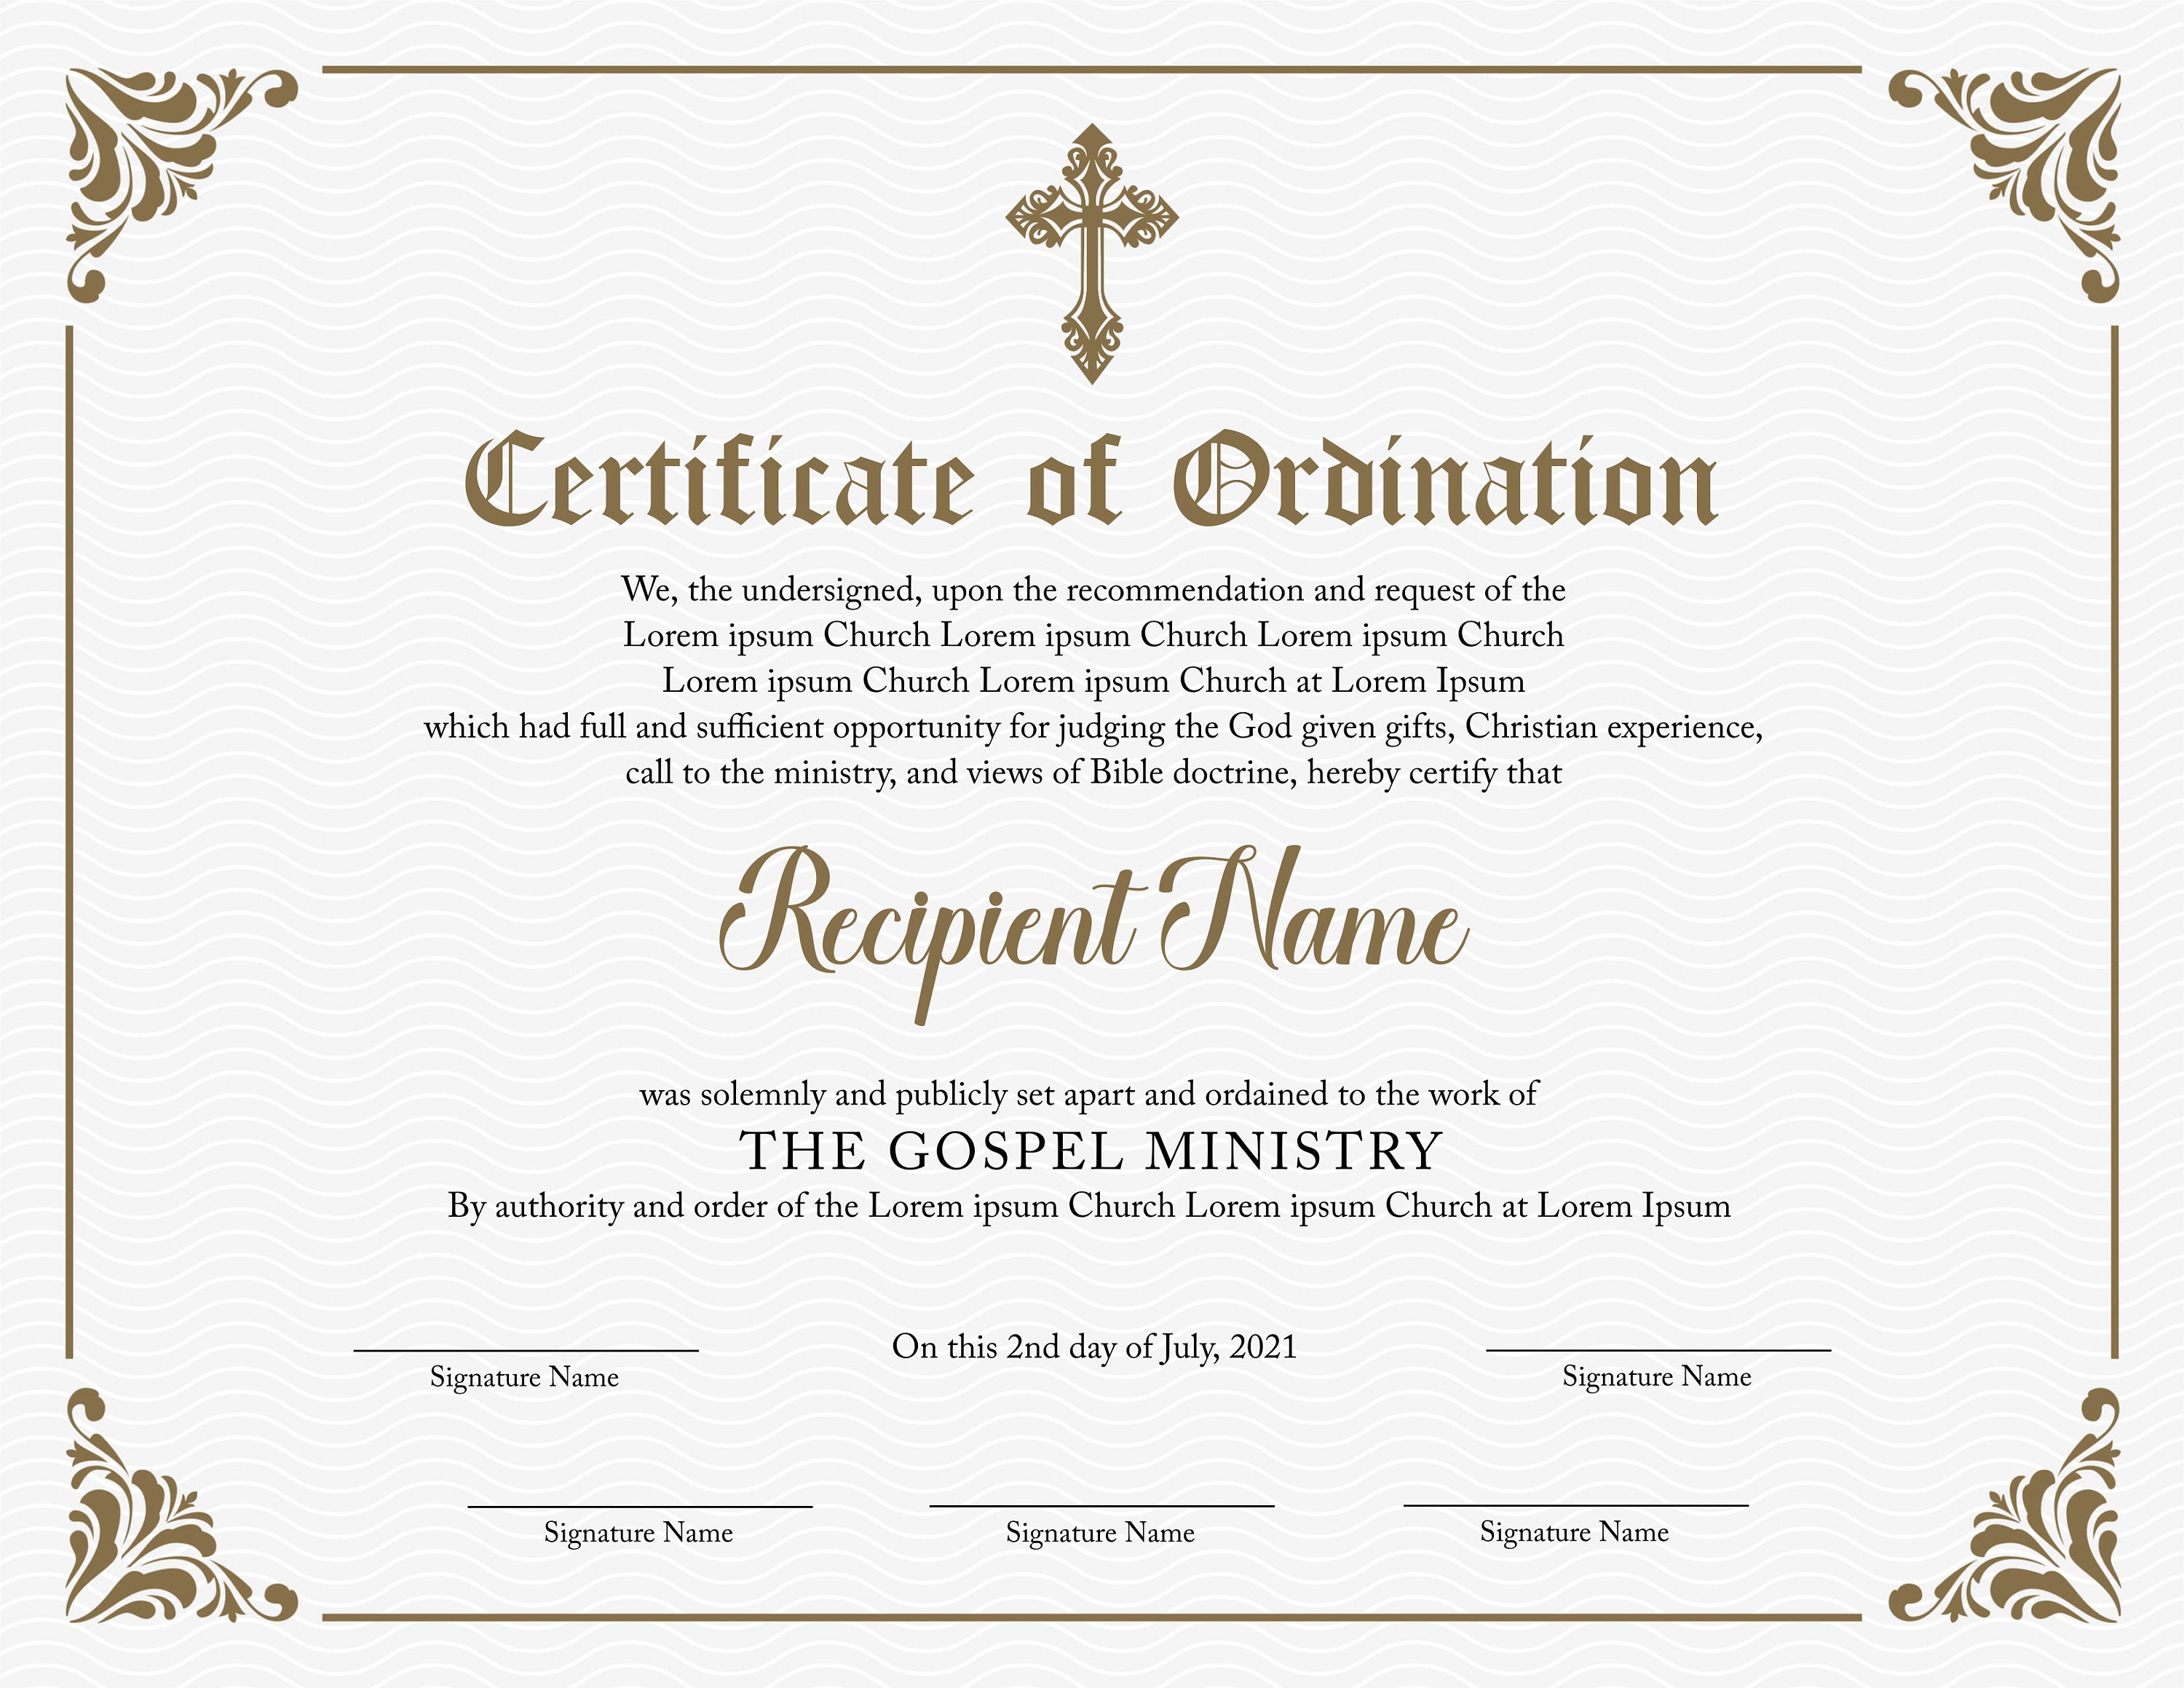 editable-ordained-minister-certificate-template-printable-etsy